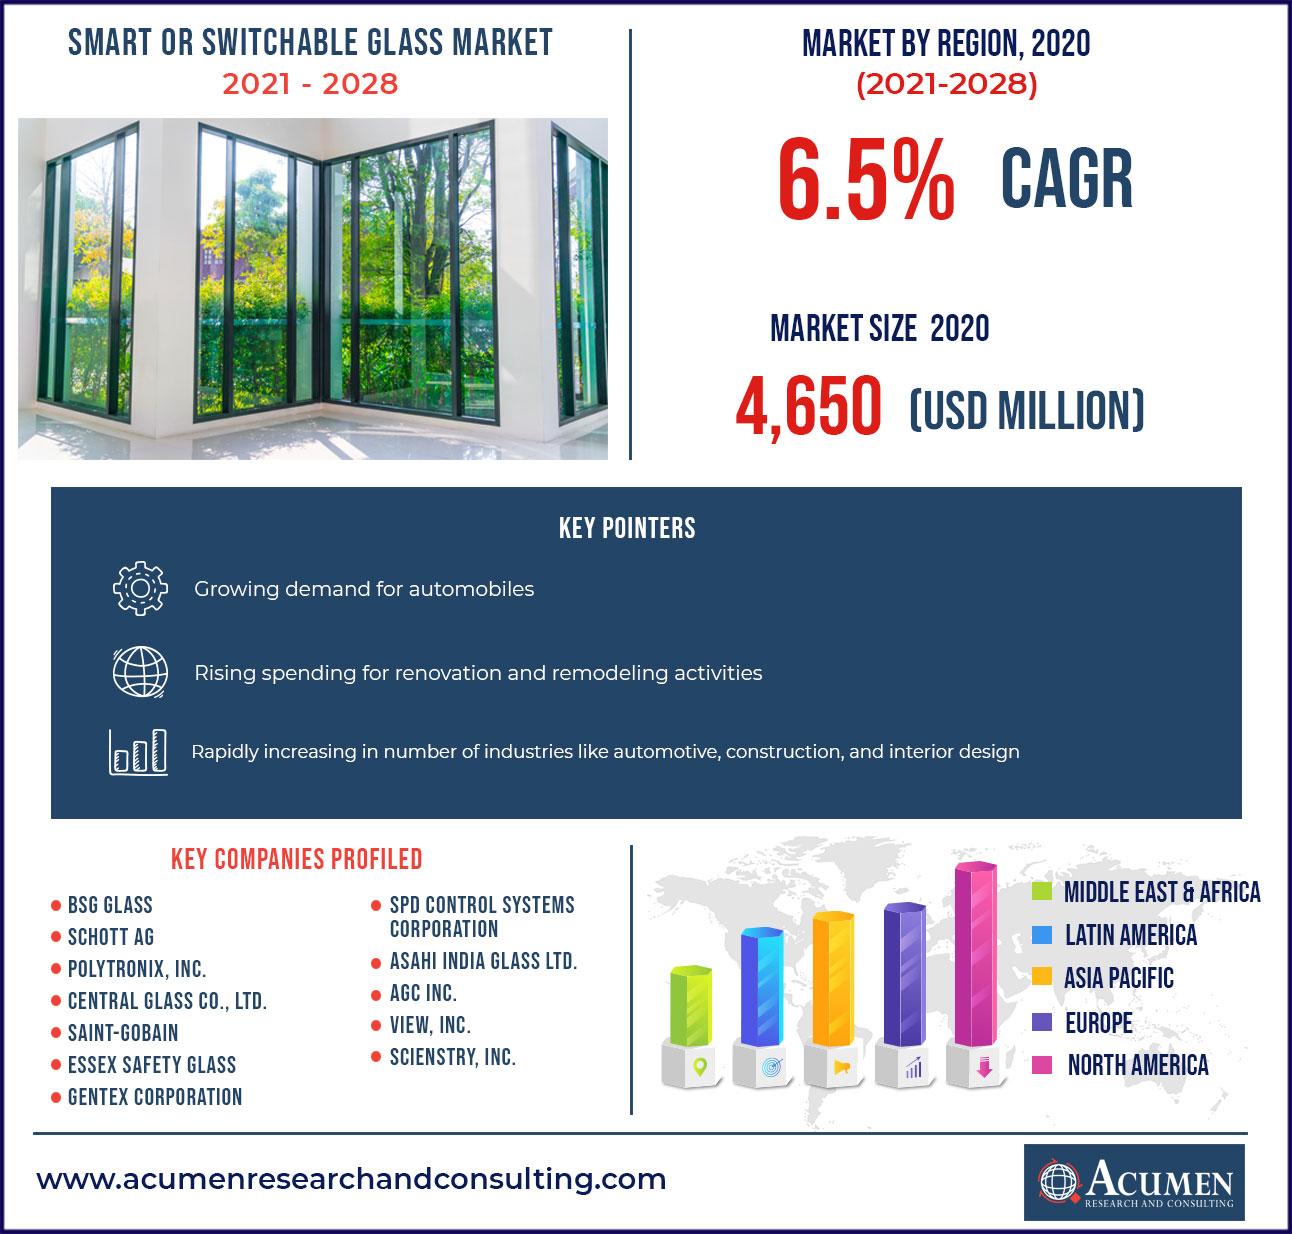 Smart or Switchable Glass Market Report 2021 - 2028